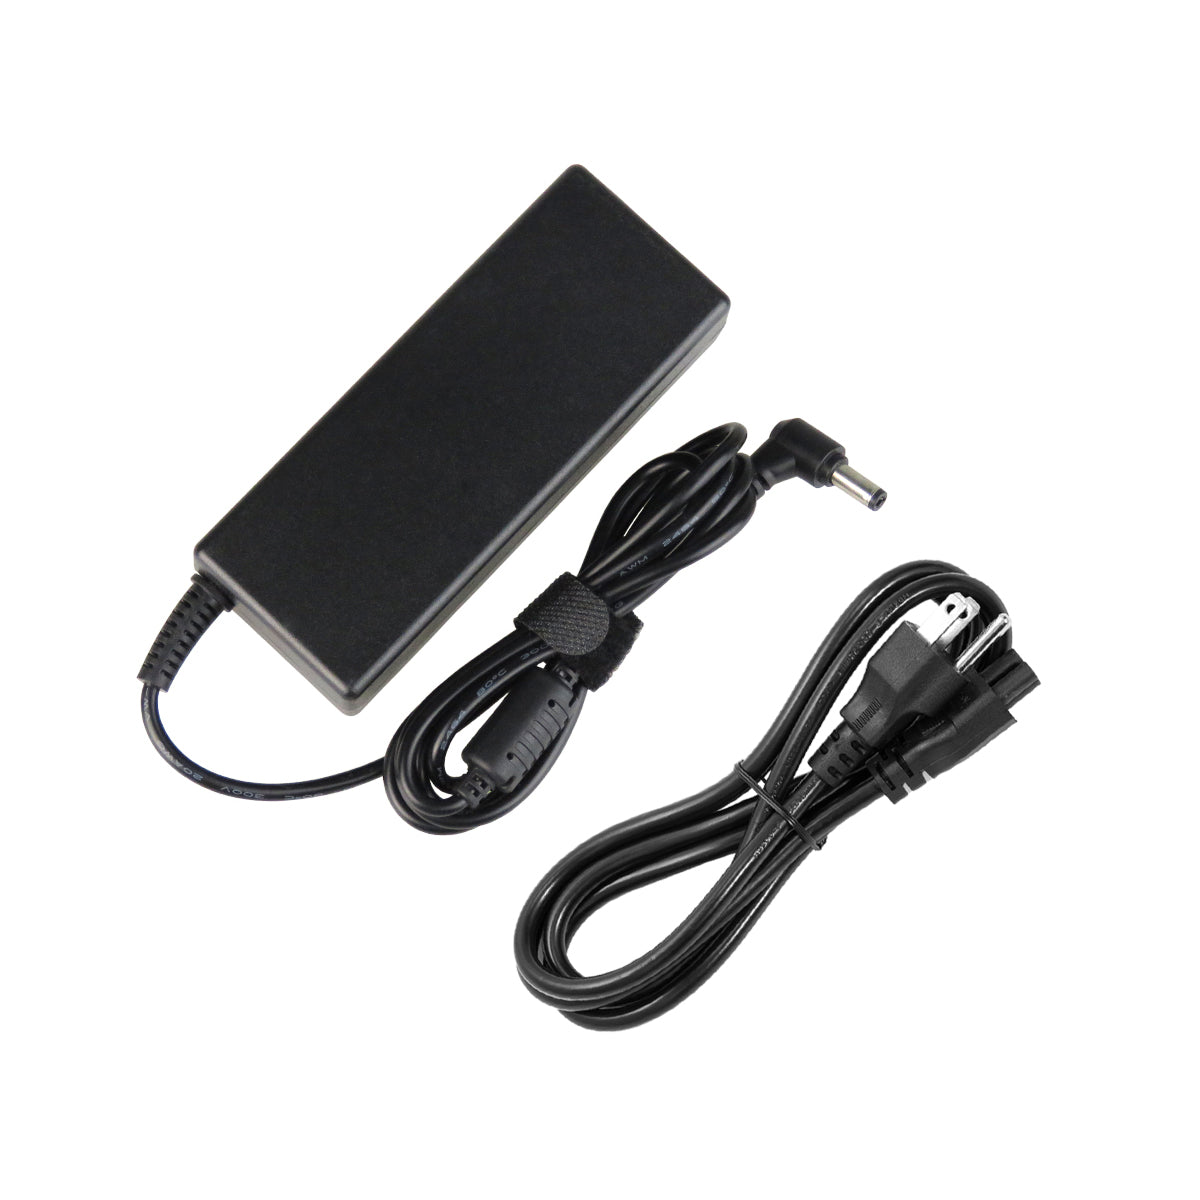 AC Adapter Charger for Gateway M-62 M-6200 Notebook.